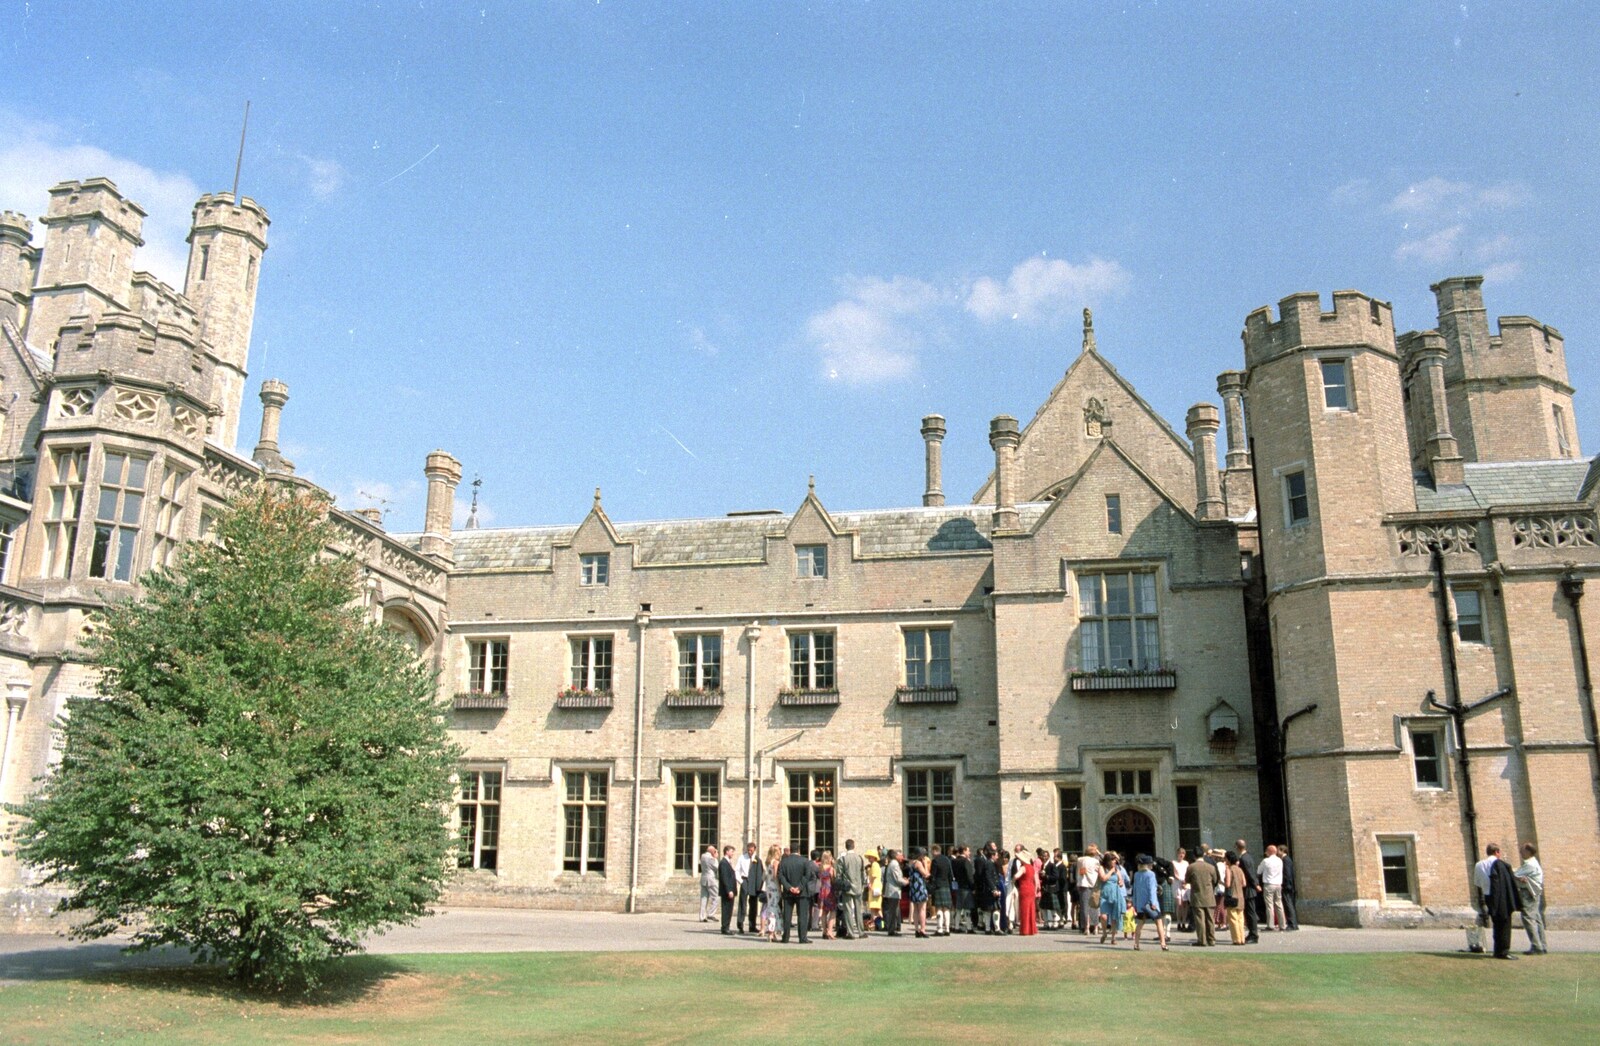 Hamish and Jane's Wedding, Canford School, Wimborne, Dorset - 5th August 1998: Guests mill around outside Canford School